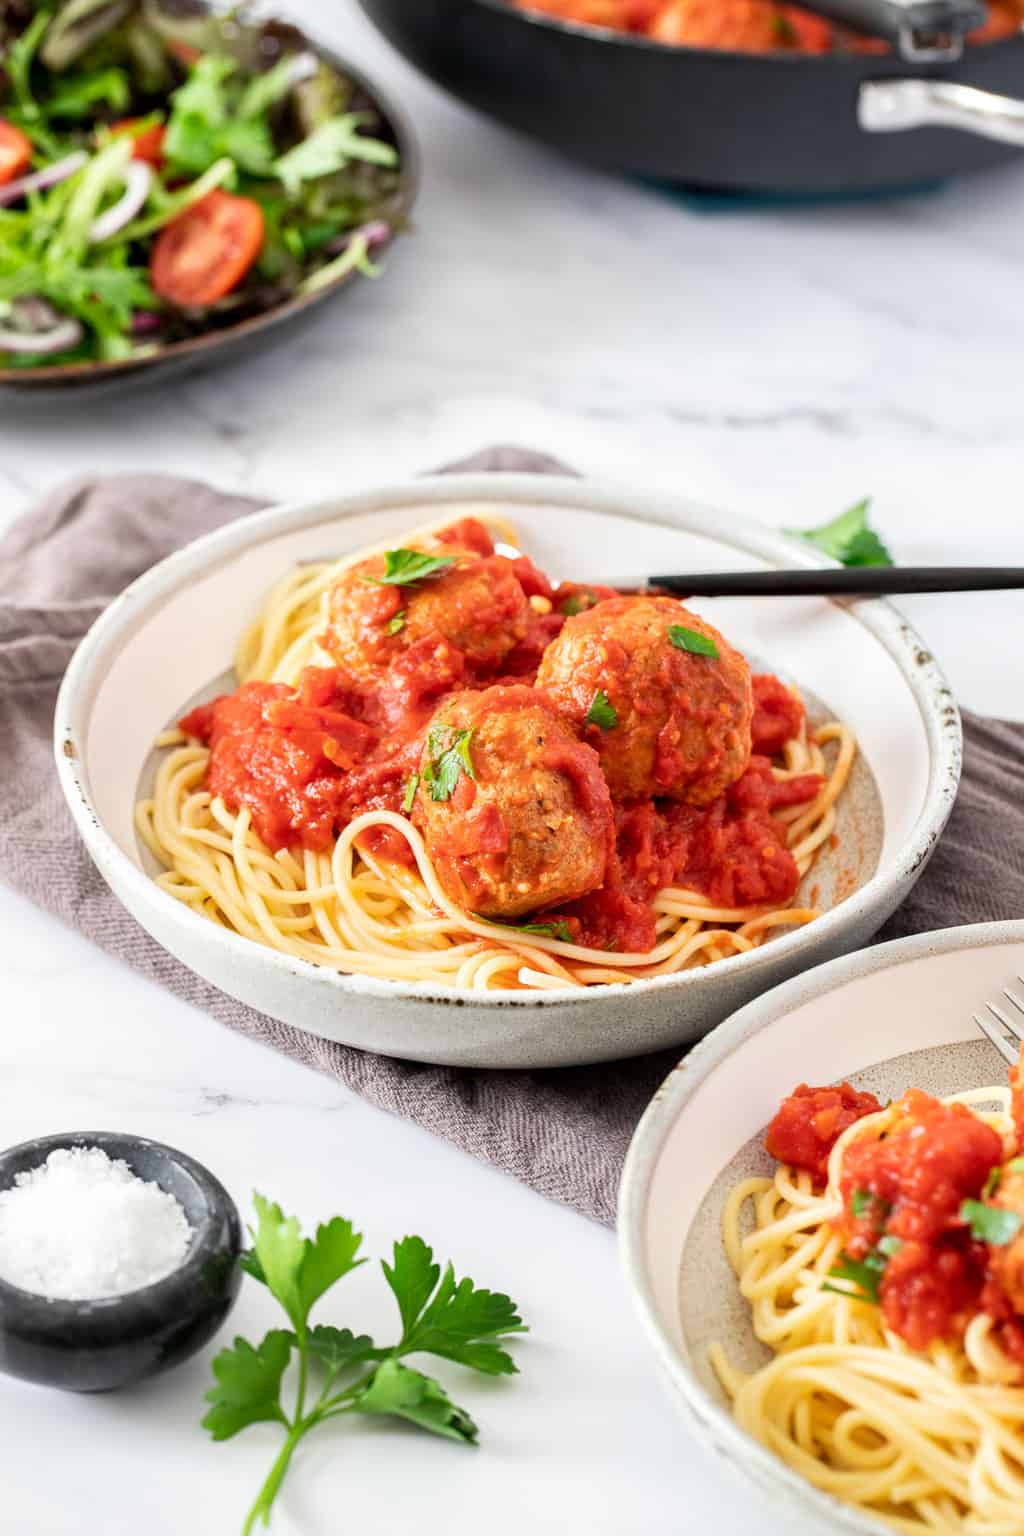 Two bowls of spaghetti with healthy turkey meatballs on top, In the back is a small plate of salad and the skillet of the rest of the meatballs